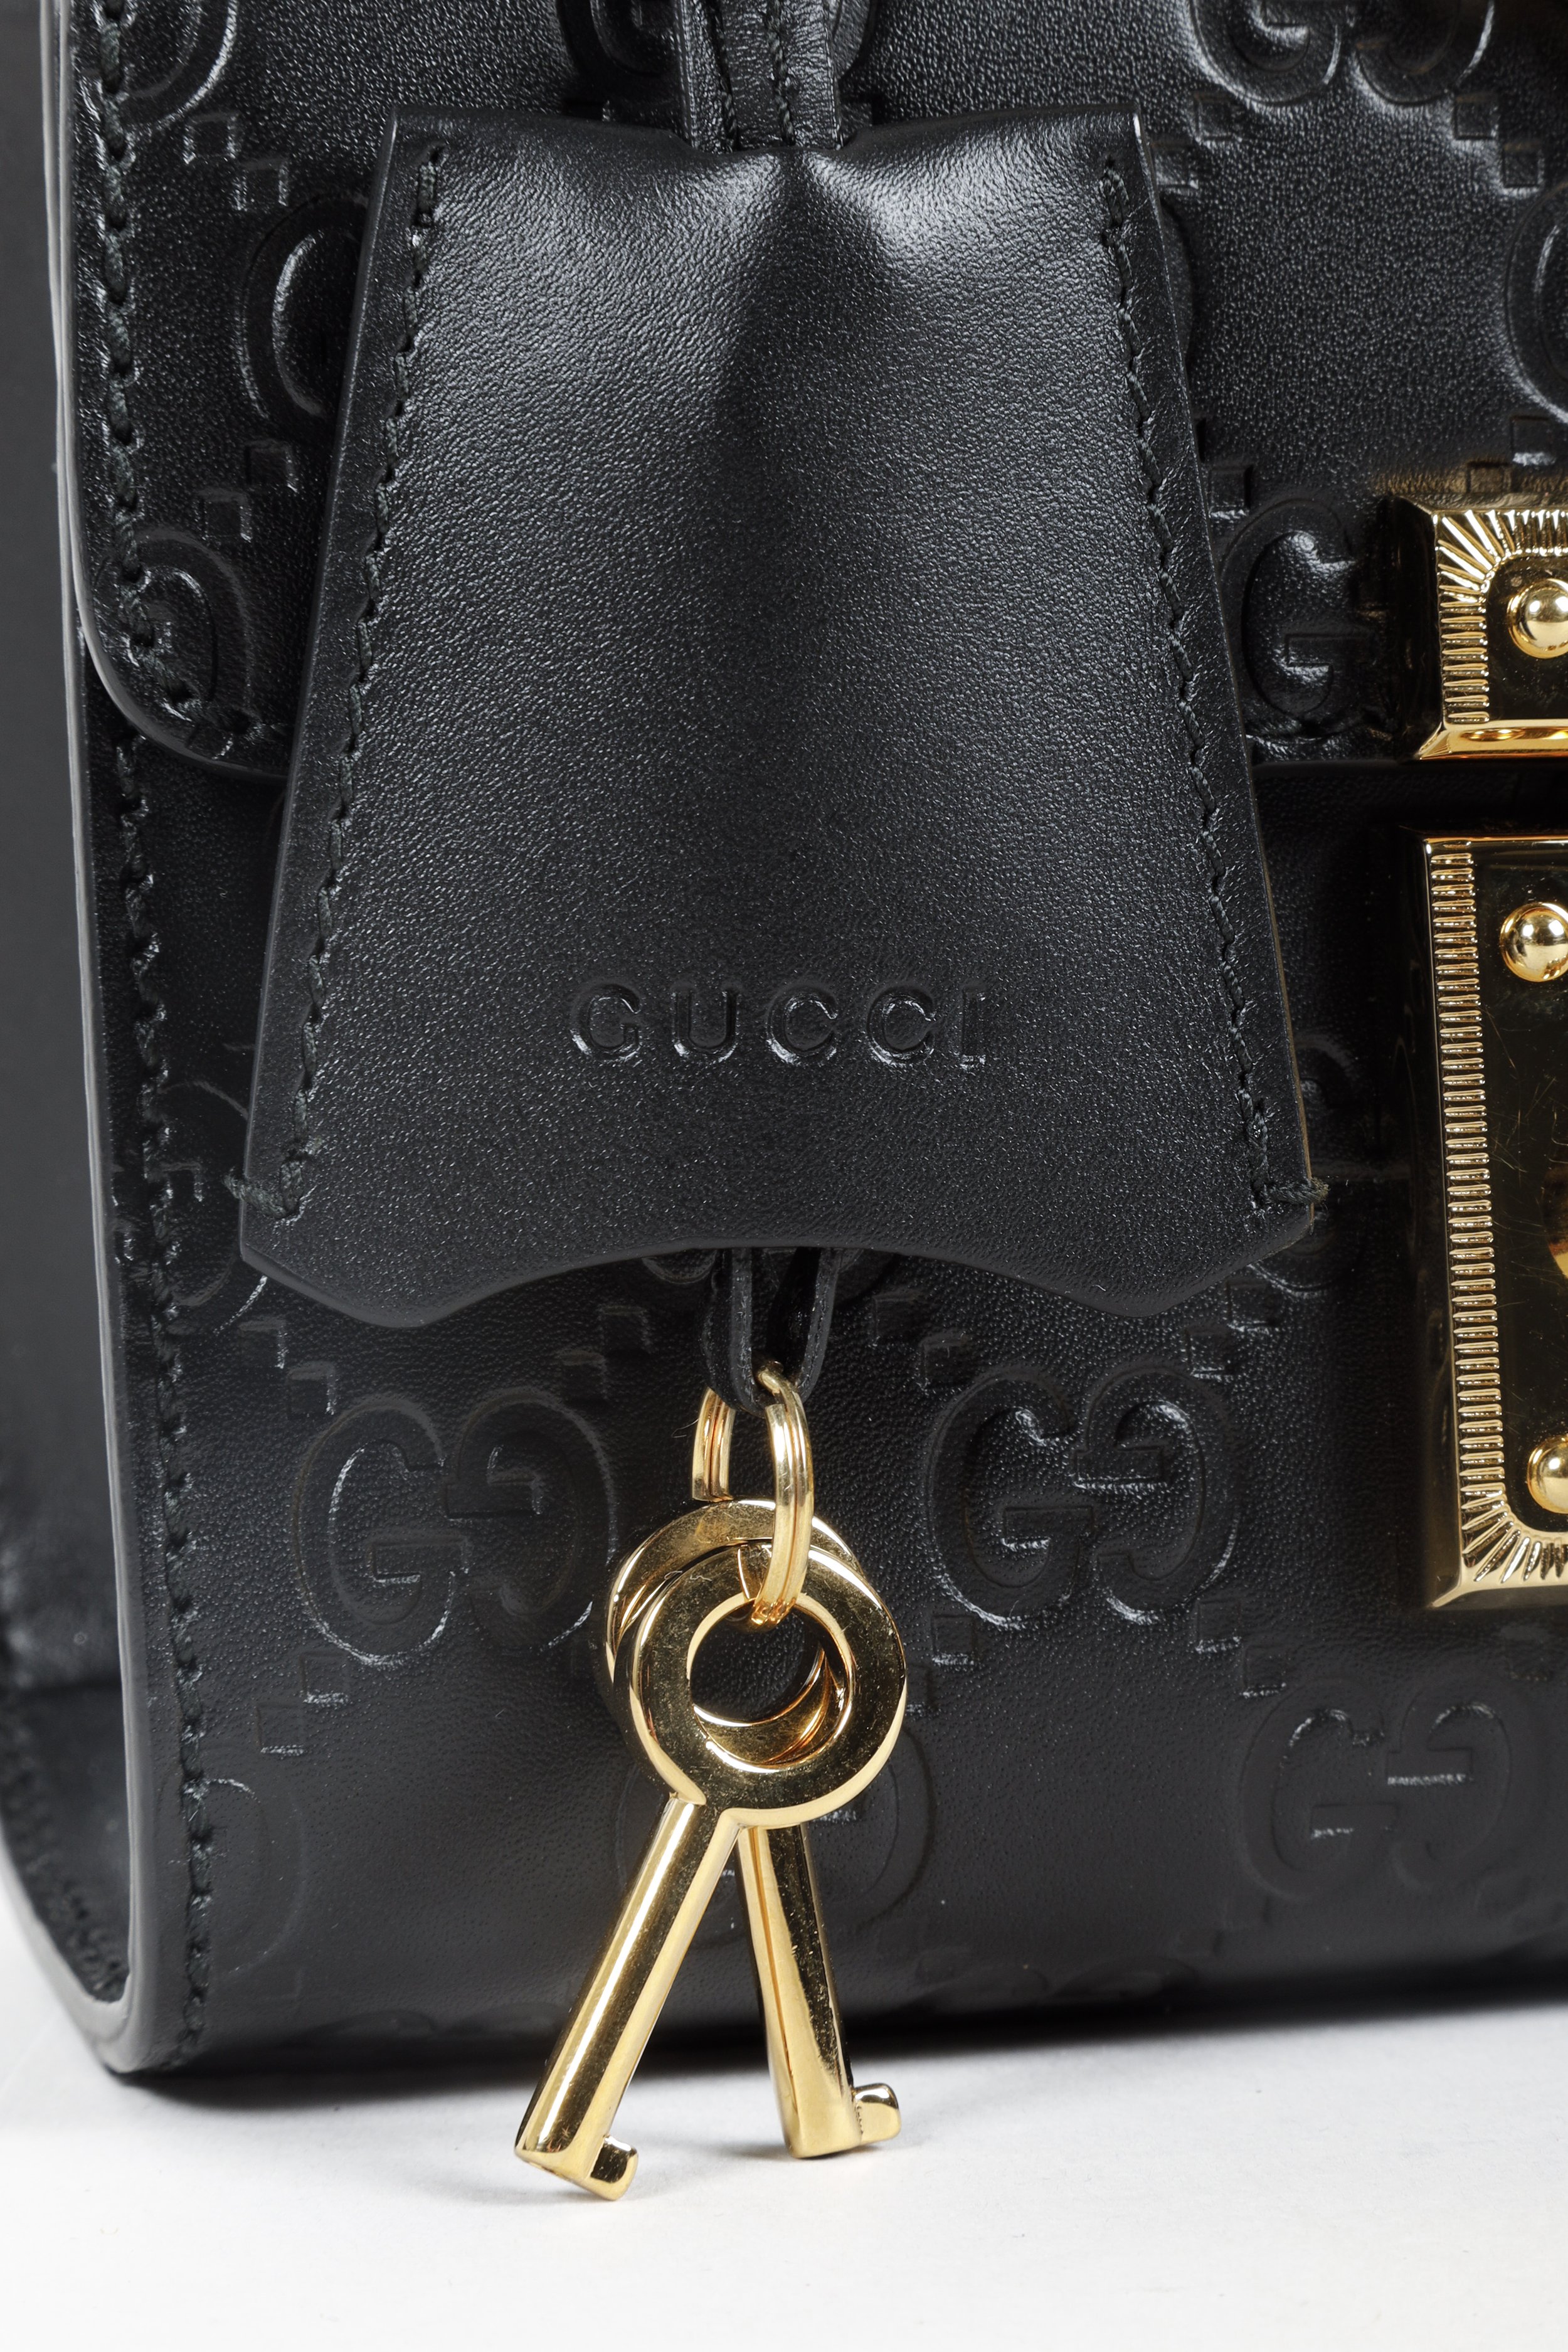 Gucci - Small Debossed GG Leather Shoulder Bag Black | www.luxurybags.eu